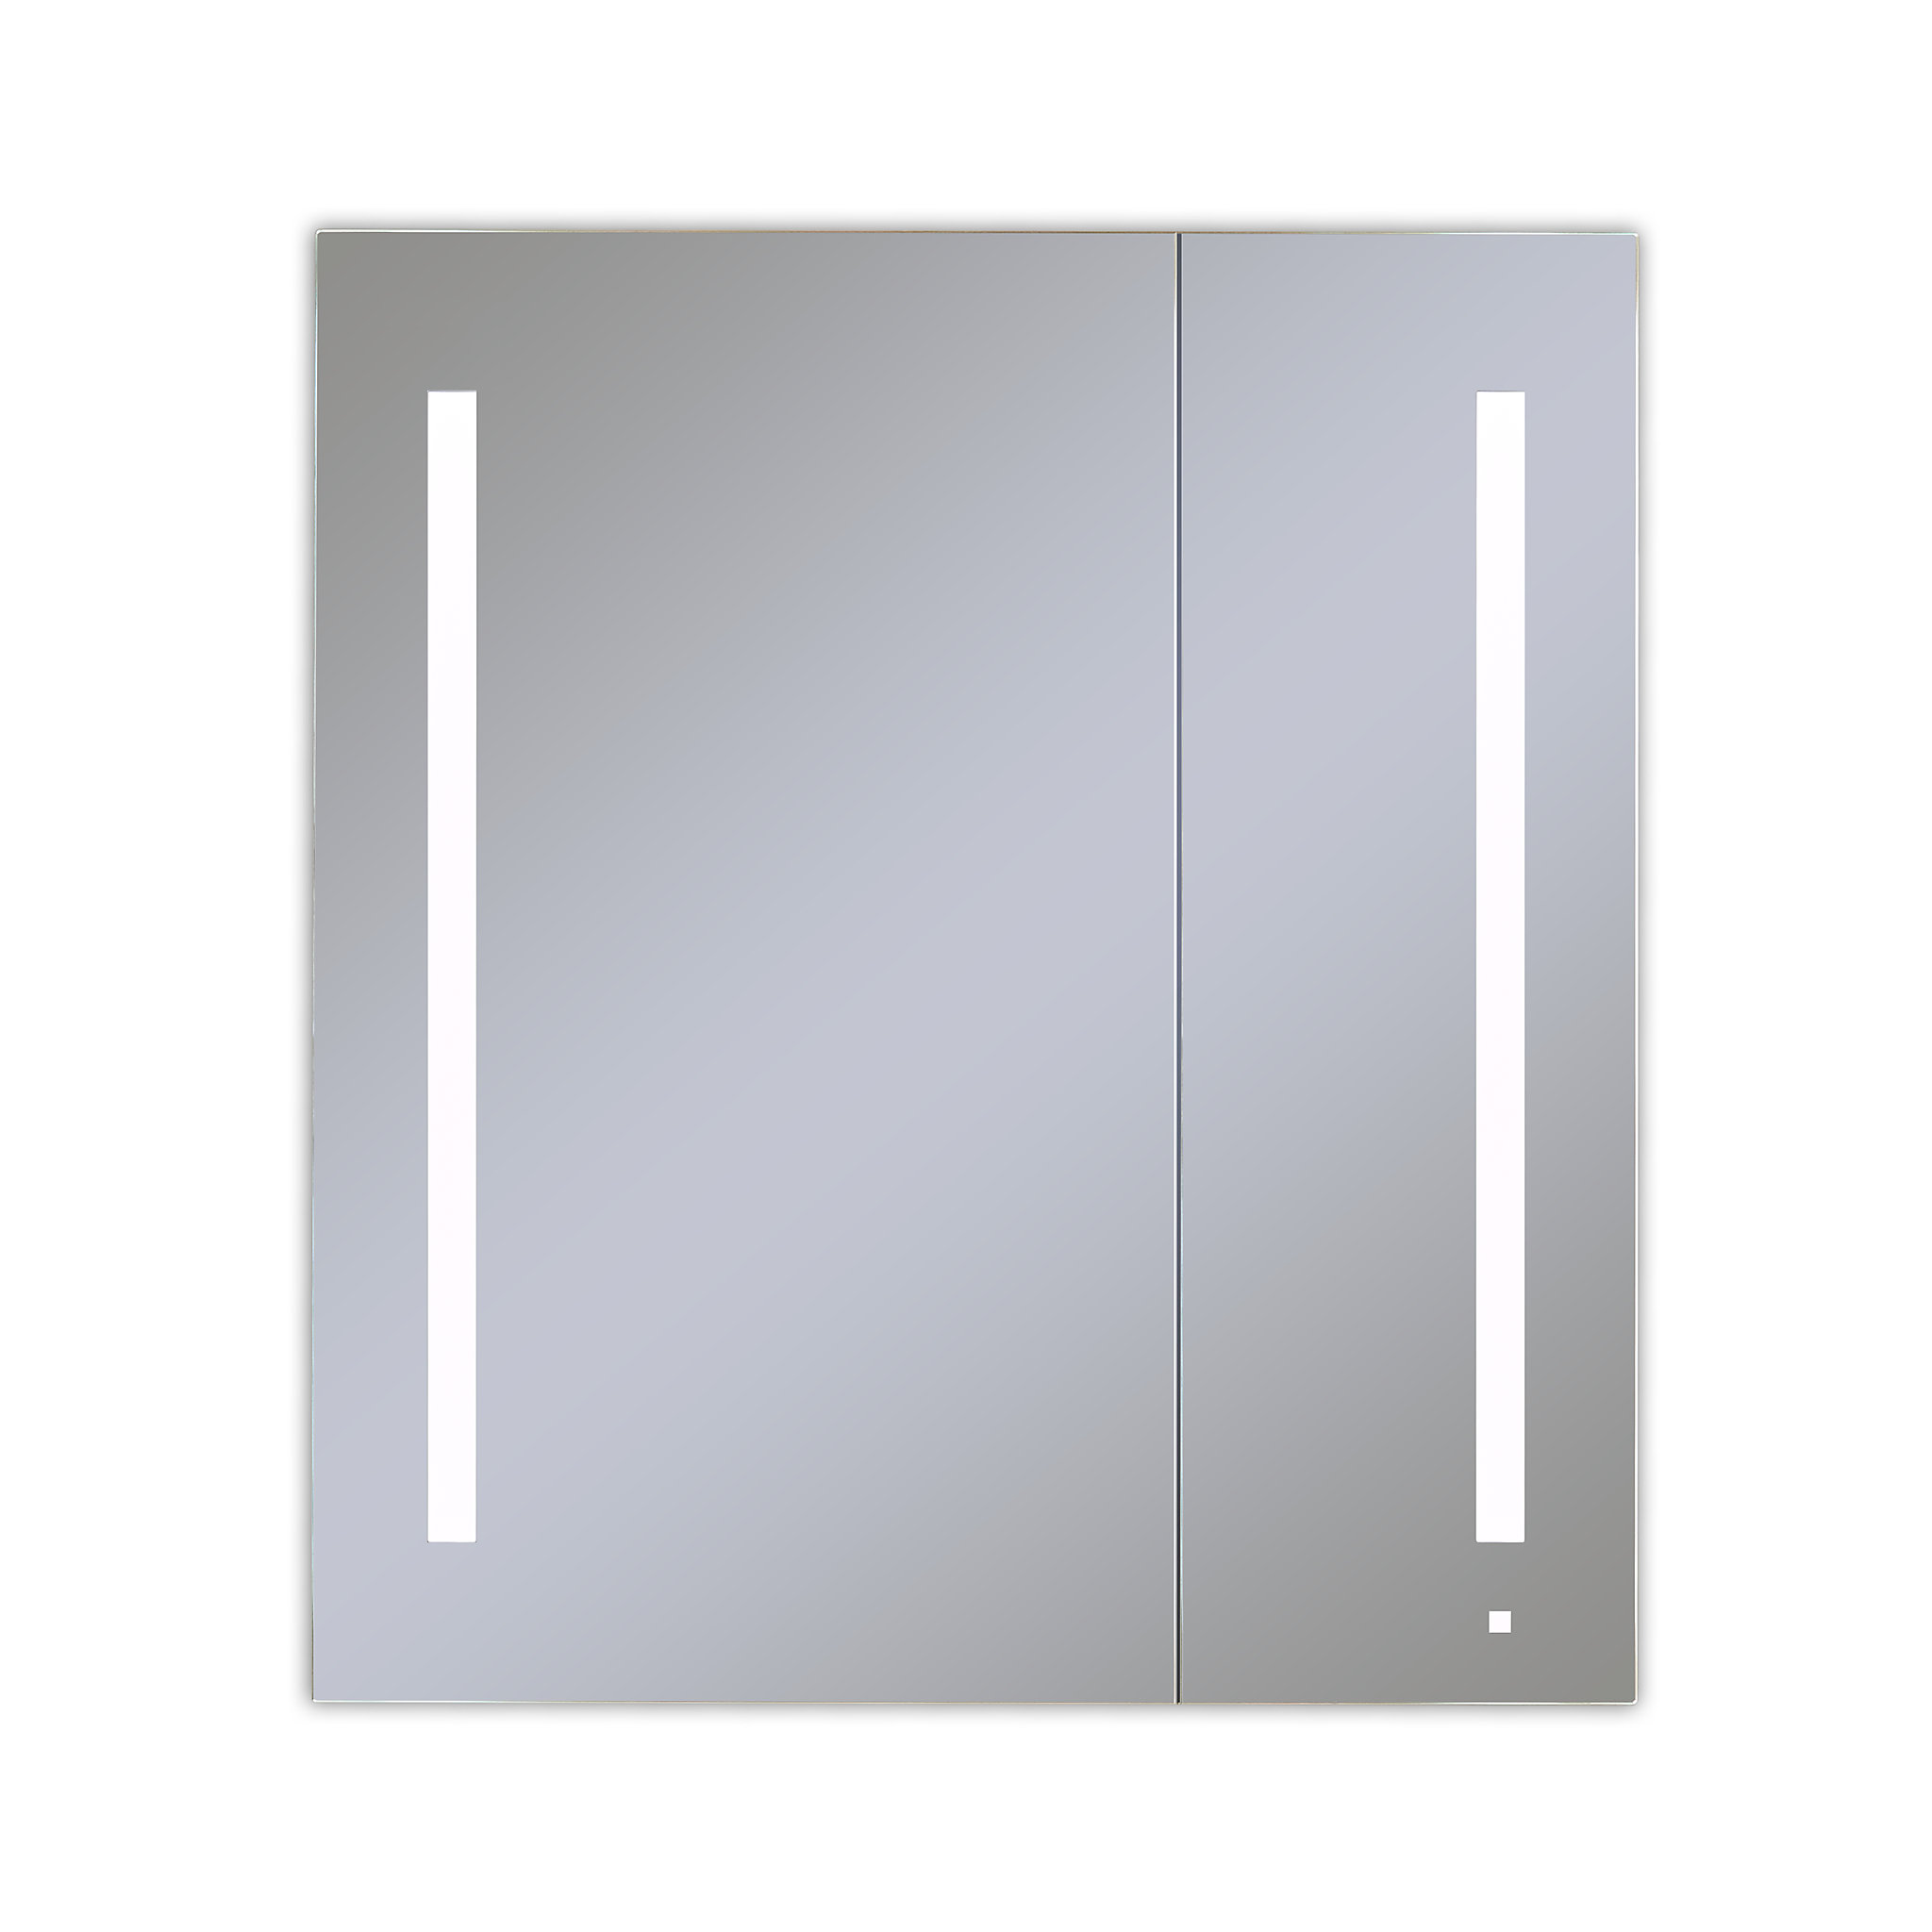 Robern AC3640D4P2LA AiO Lighted Cabinet, 36" x 40" x 4", Two Door, LUM Lighting, 4000K Temperature (Cool Light), Dimmable, OM Au